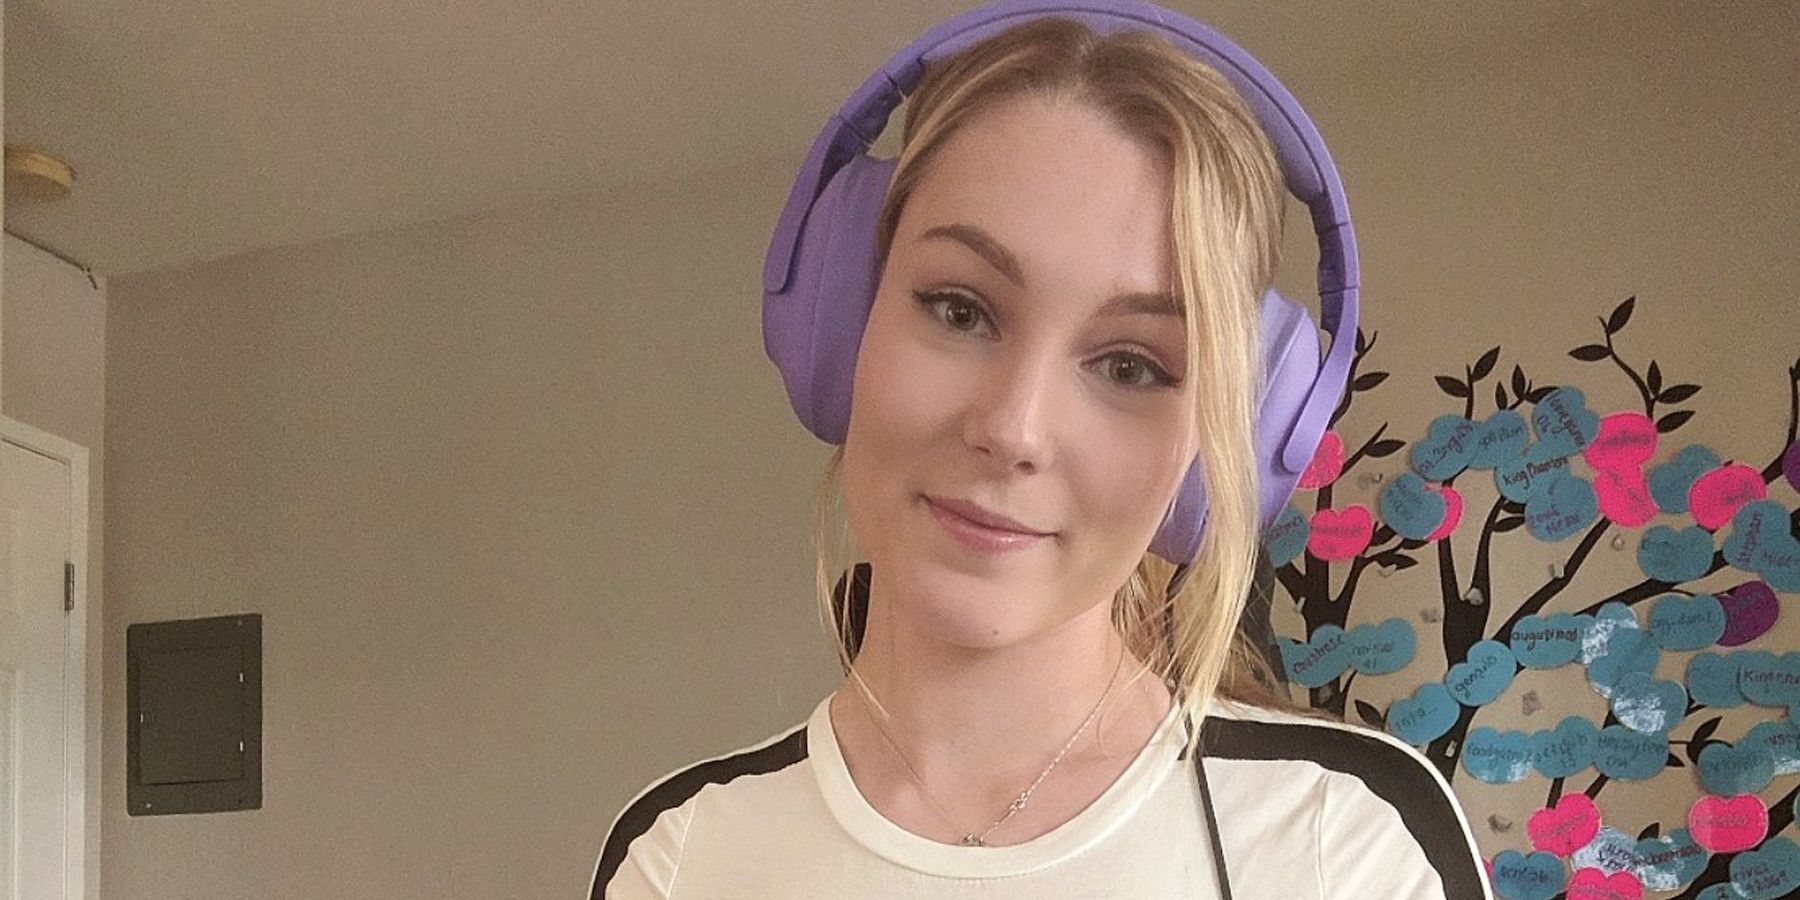 cecile harris add photo stpeach banned from twitch